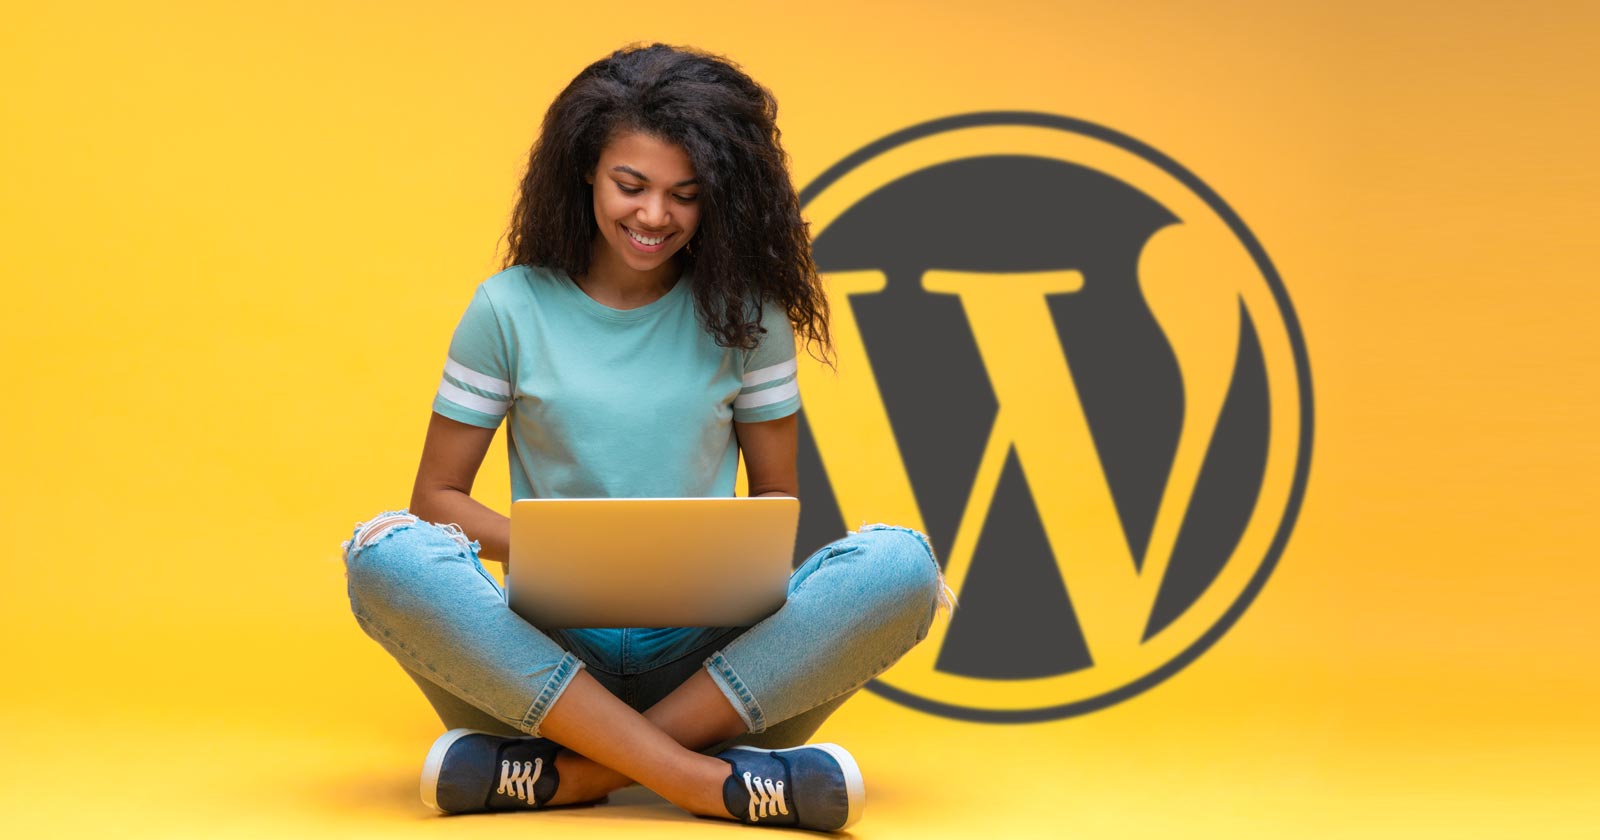 Studio by WordPress lets you create WordPress sites on your desktop, plus other similar tools.